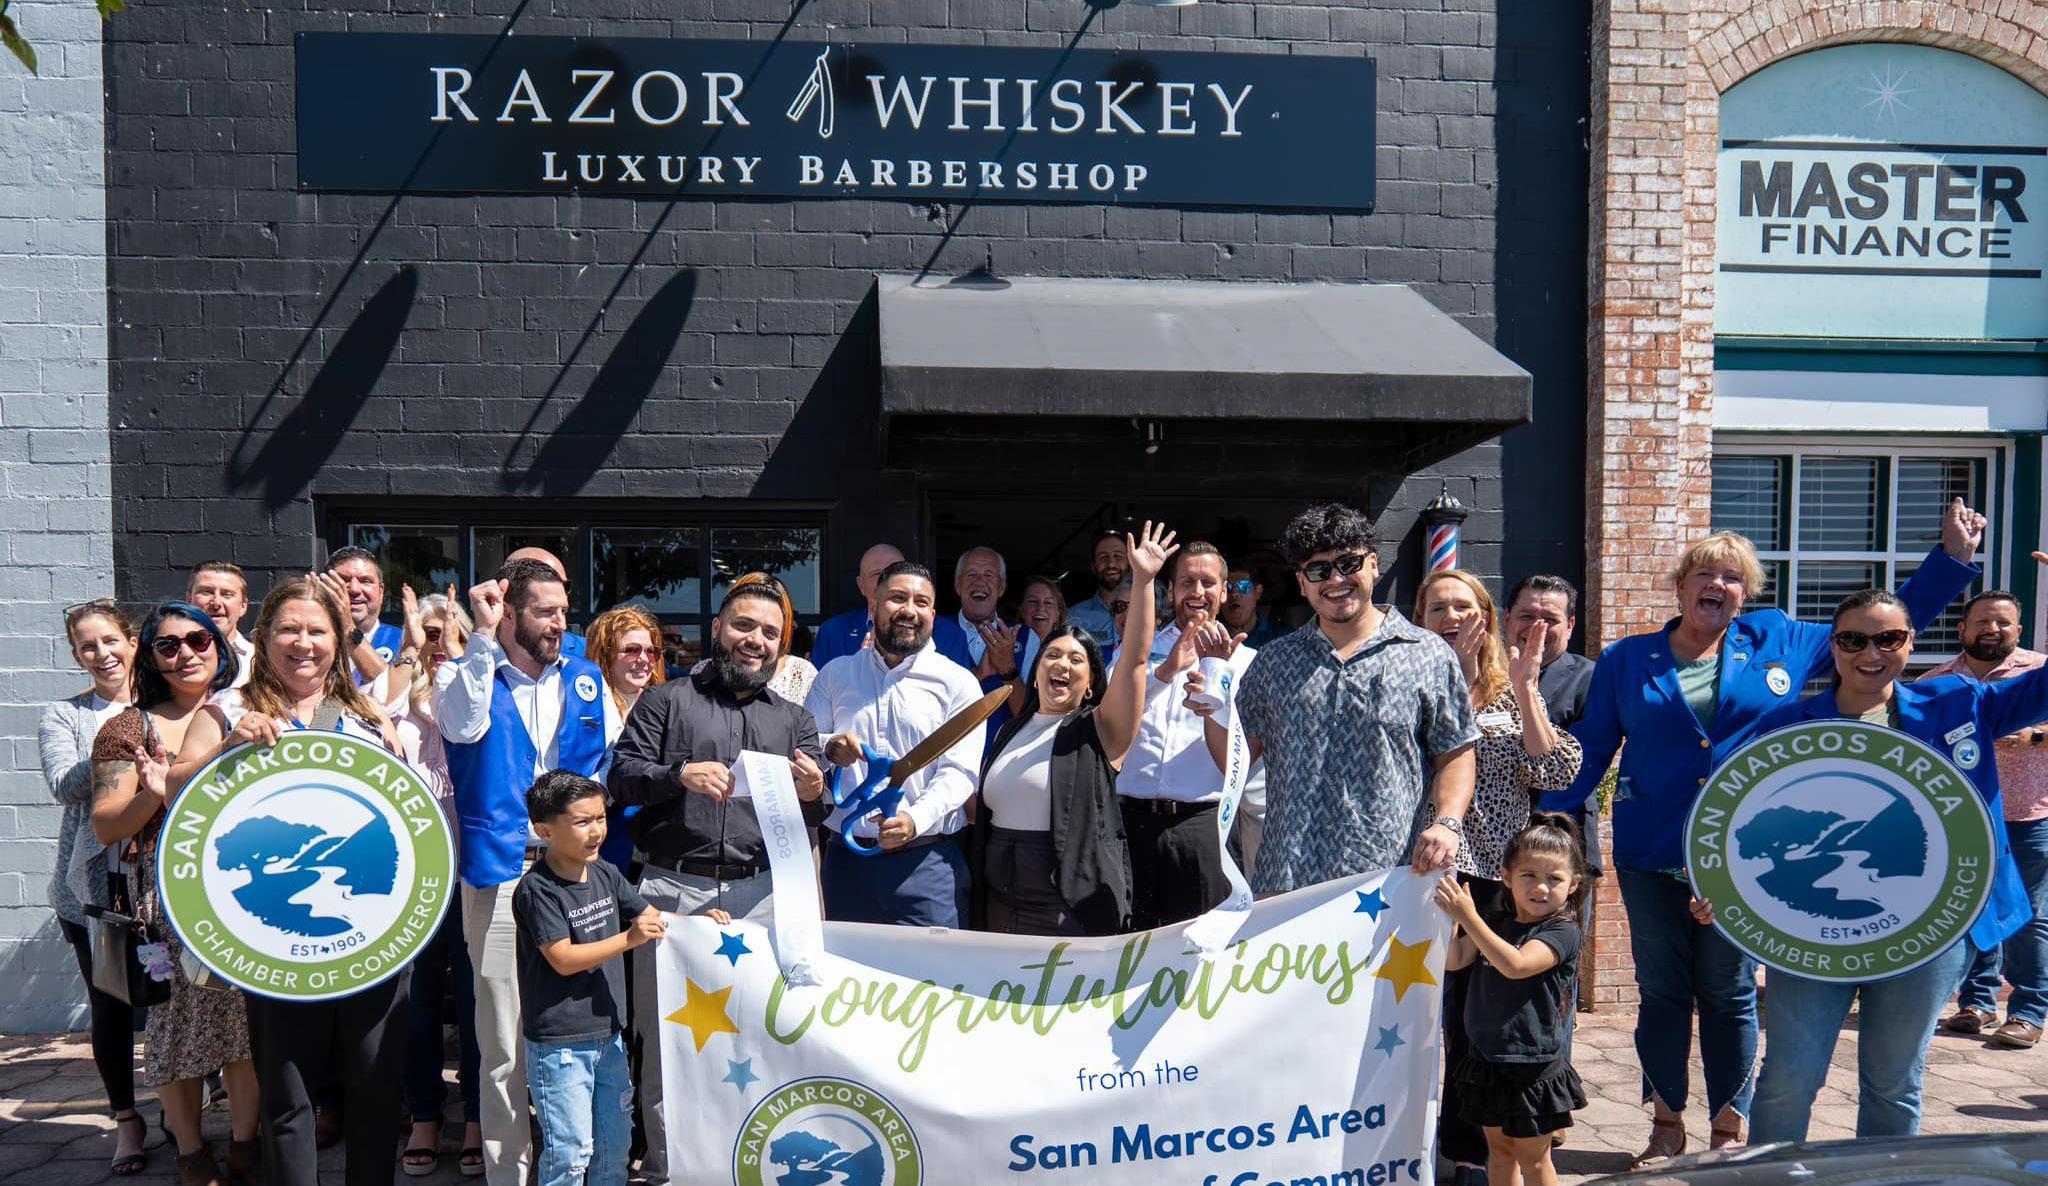 San Marcos Area Chamber of Commerce Ribbon Cutting